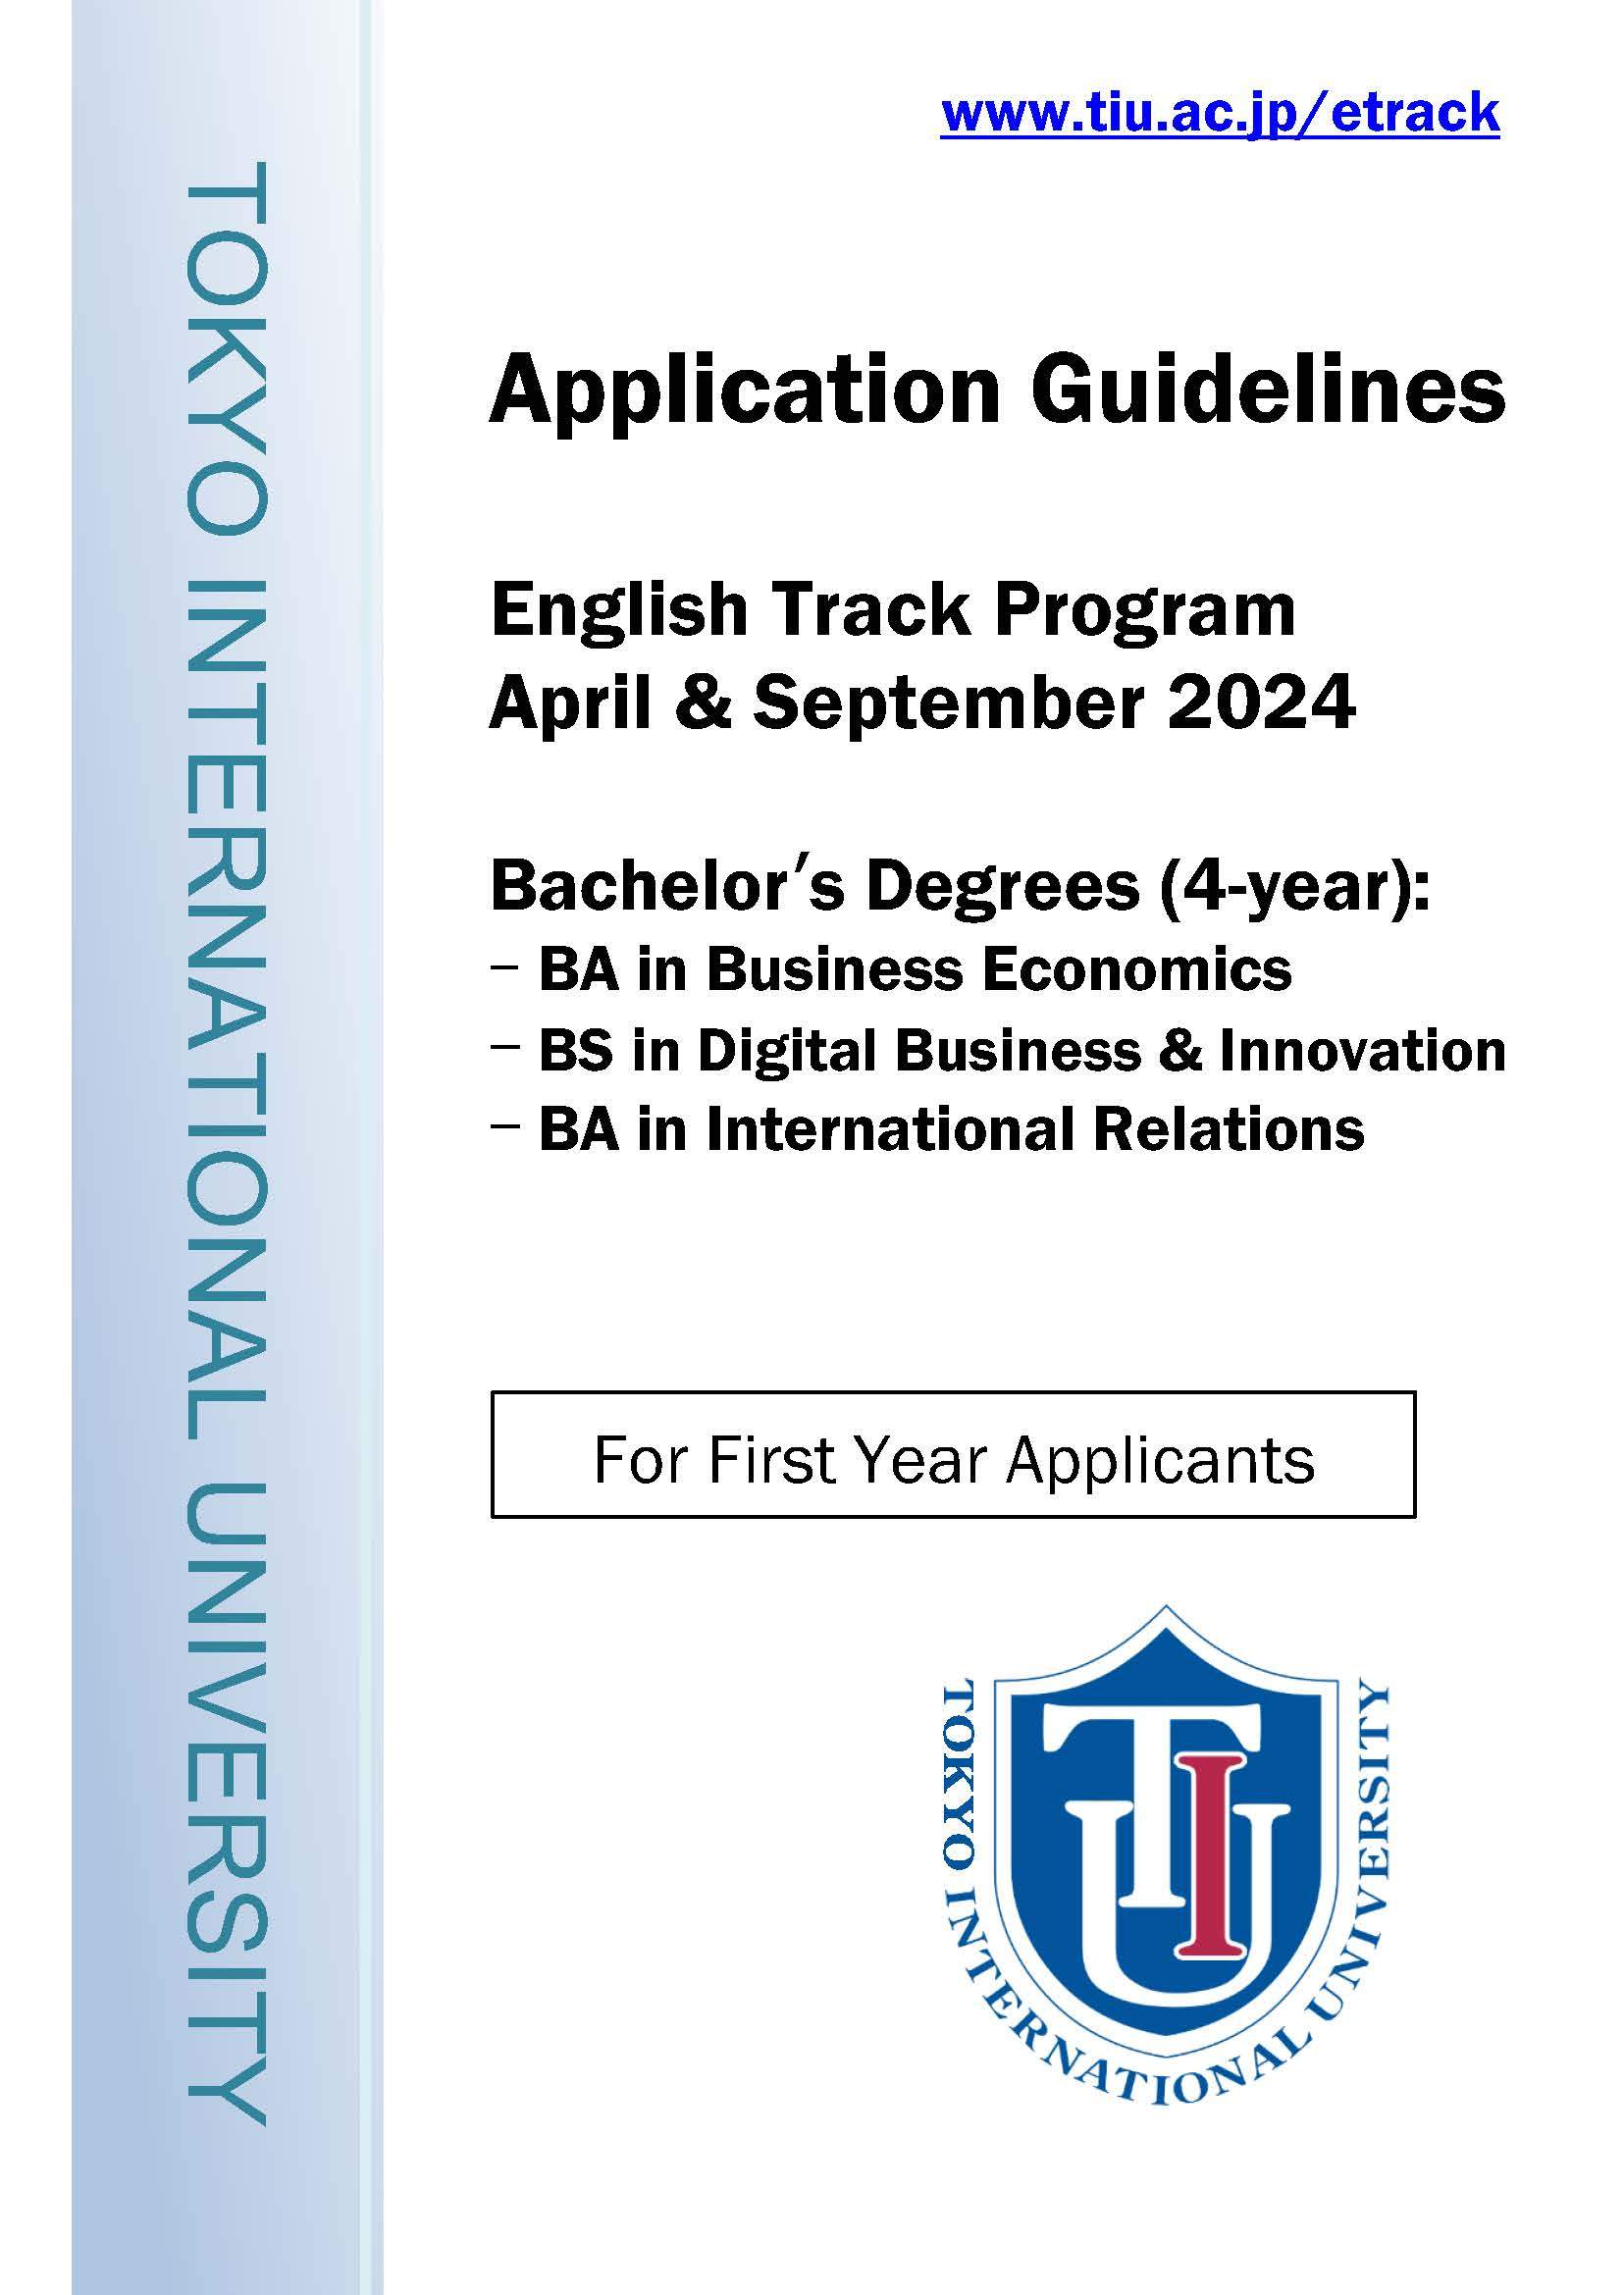 Application Guideline 2024